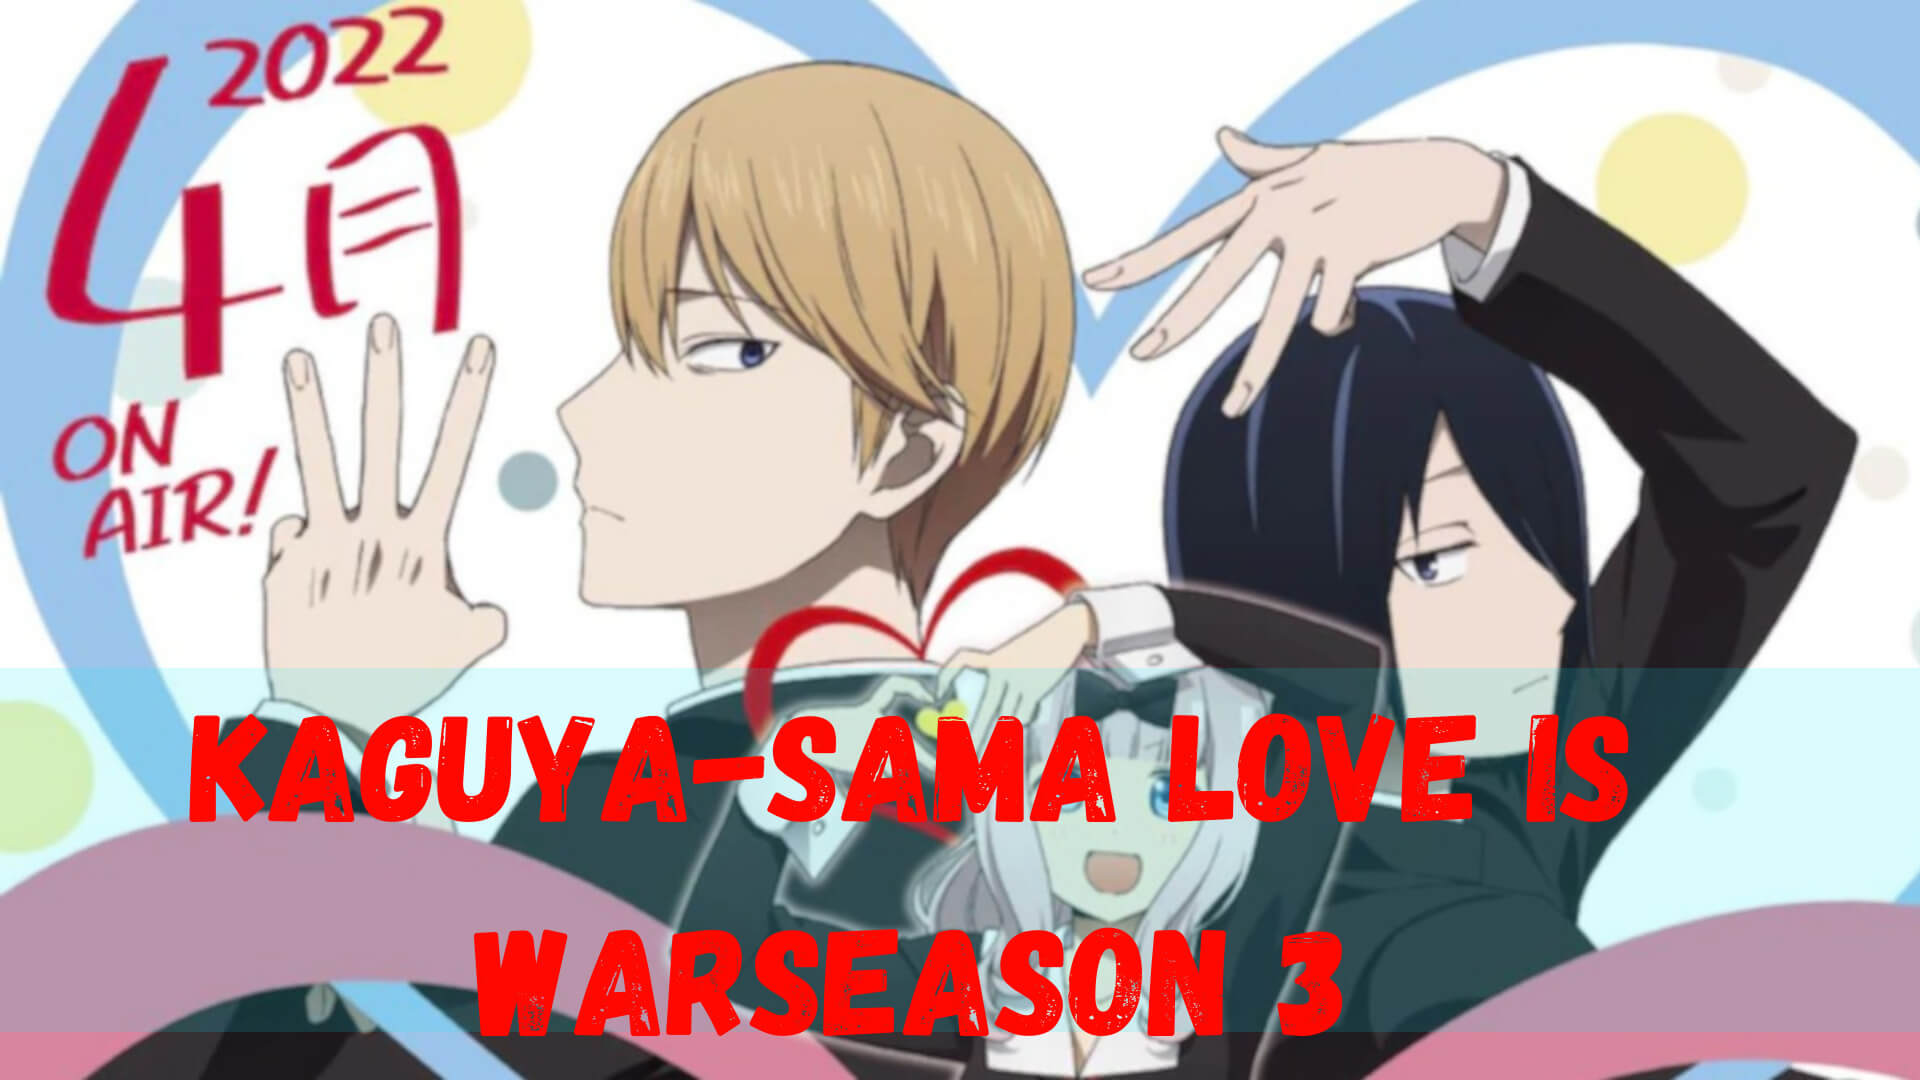 Kaguya-sama Love is War Season 3 Plot: What would it be able to be About?